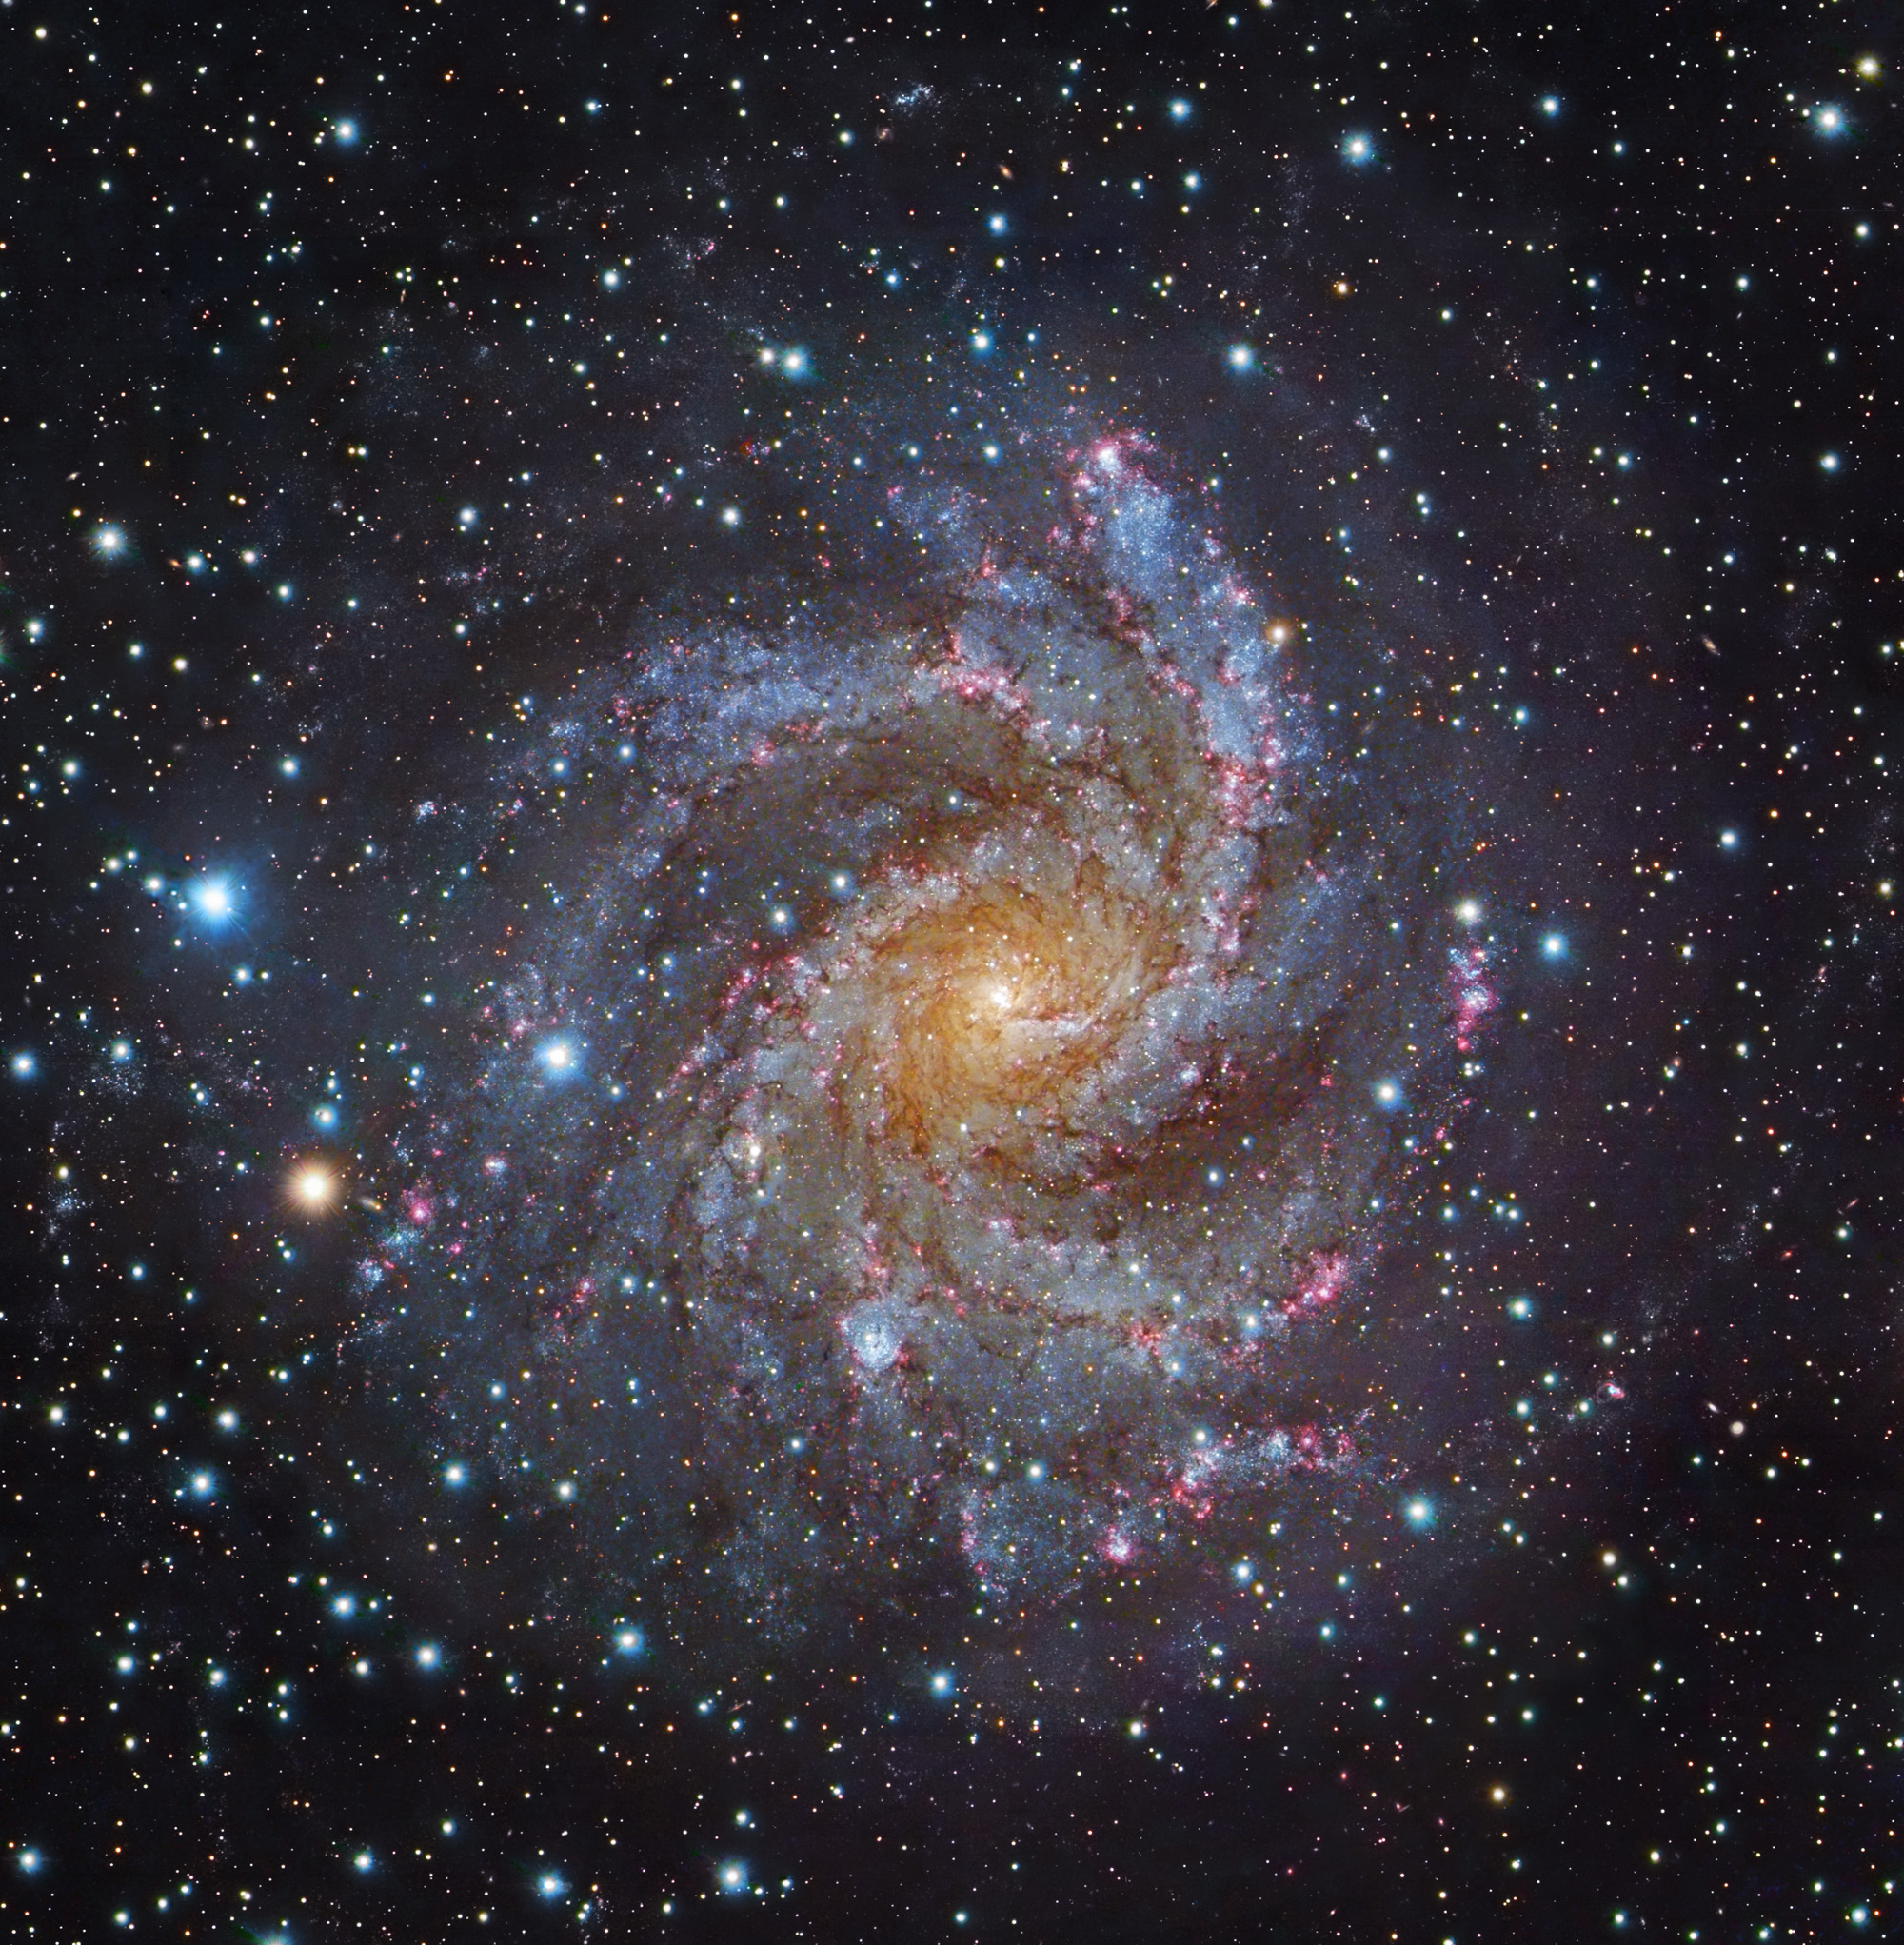 Image of Spiral galaxy, which looks like arms spinning around the center, NGC 6332.